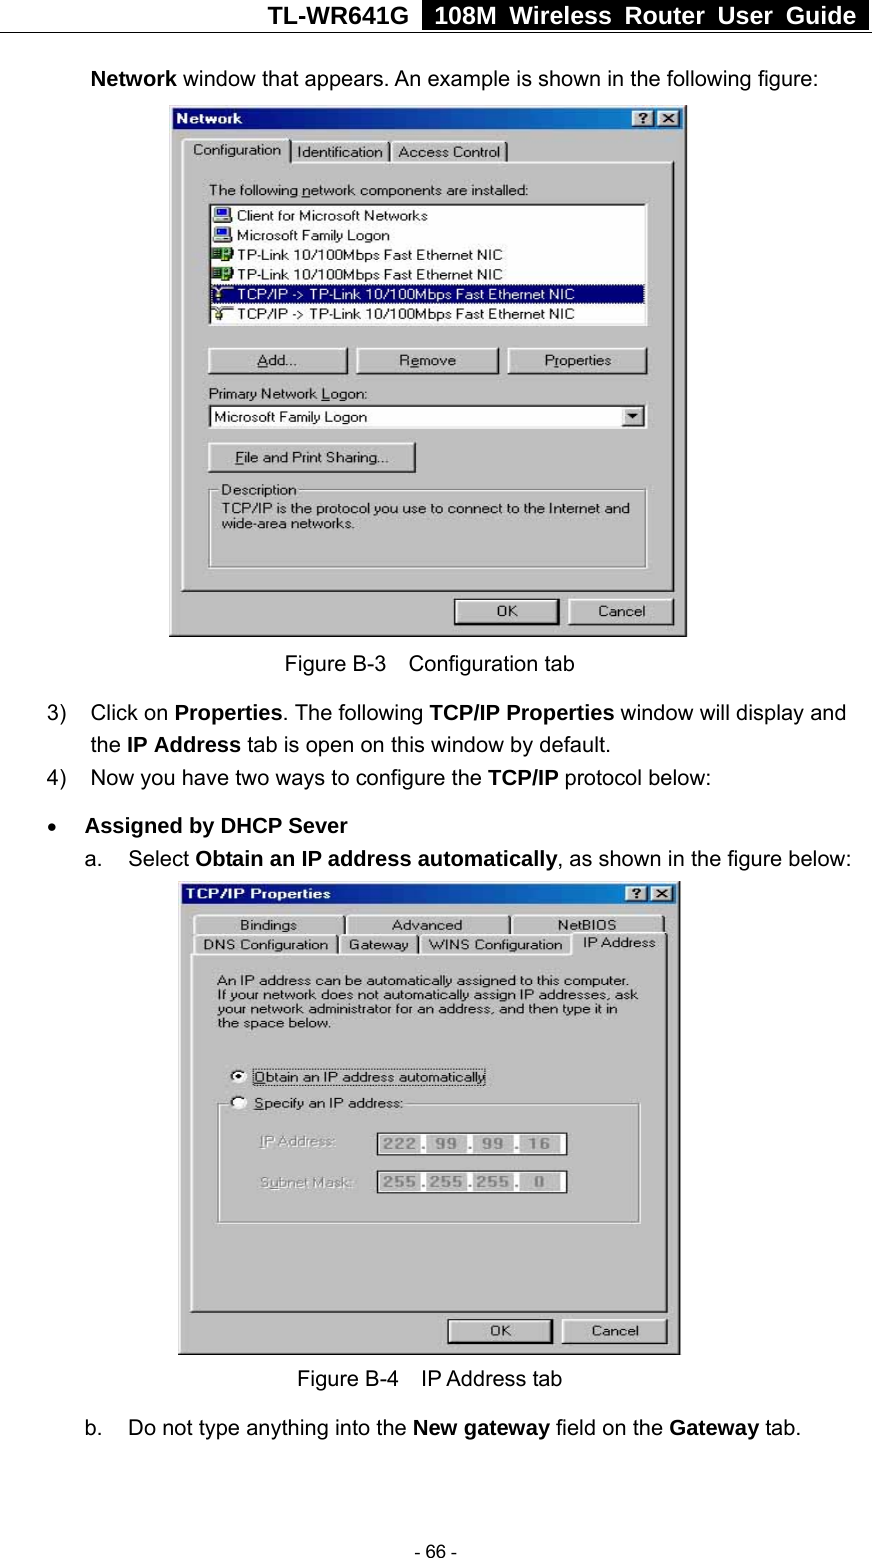 TL-WR641G   108M Wireless Router User Guide  Network window that appears. An example is shown in the following figure:  Figure B-3  Configuration tab 3) Click on Properties. The following TCP/IP Properties window will display and the IP Address tab is open on this window by default. 4)  Now you have two ways to configure the TCP/IP protocol below: • Assigned by DHCP Sever a. Select Obtain an IP address automatically, as shown in the figure below:  Figure B-4  IP Address tab b.  Do not type anything into the New gateway field on the Gateway tab.    - 66 - 